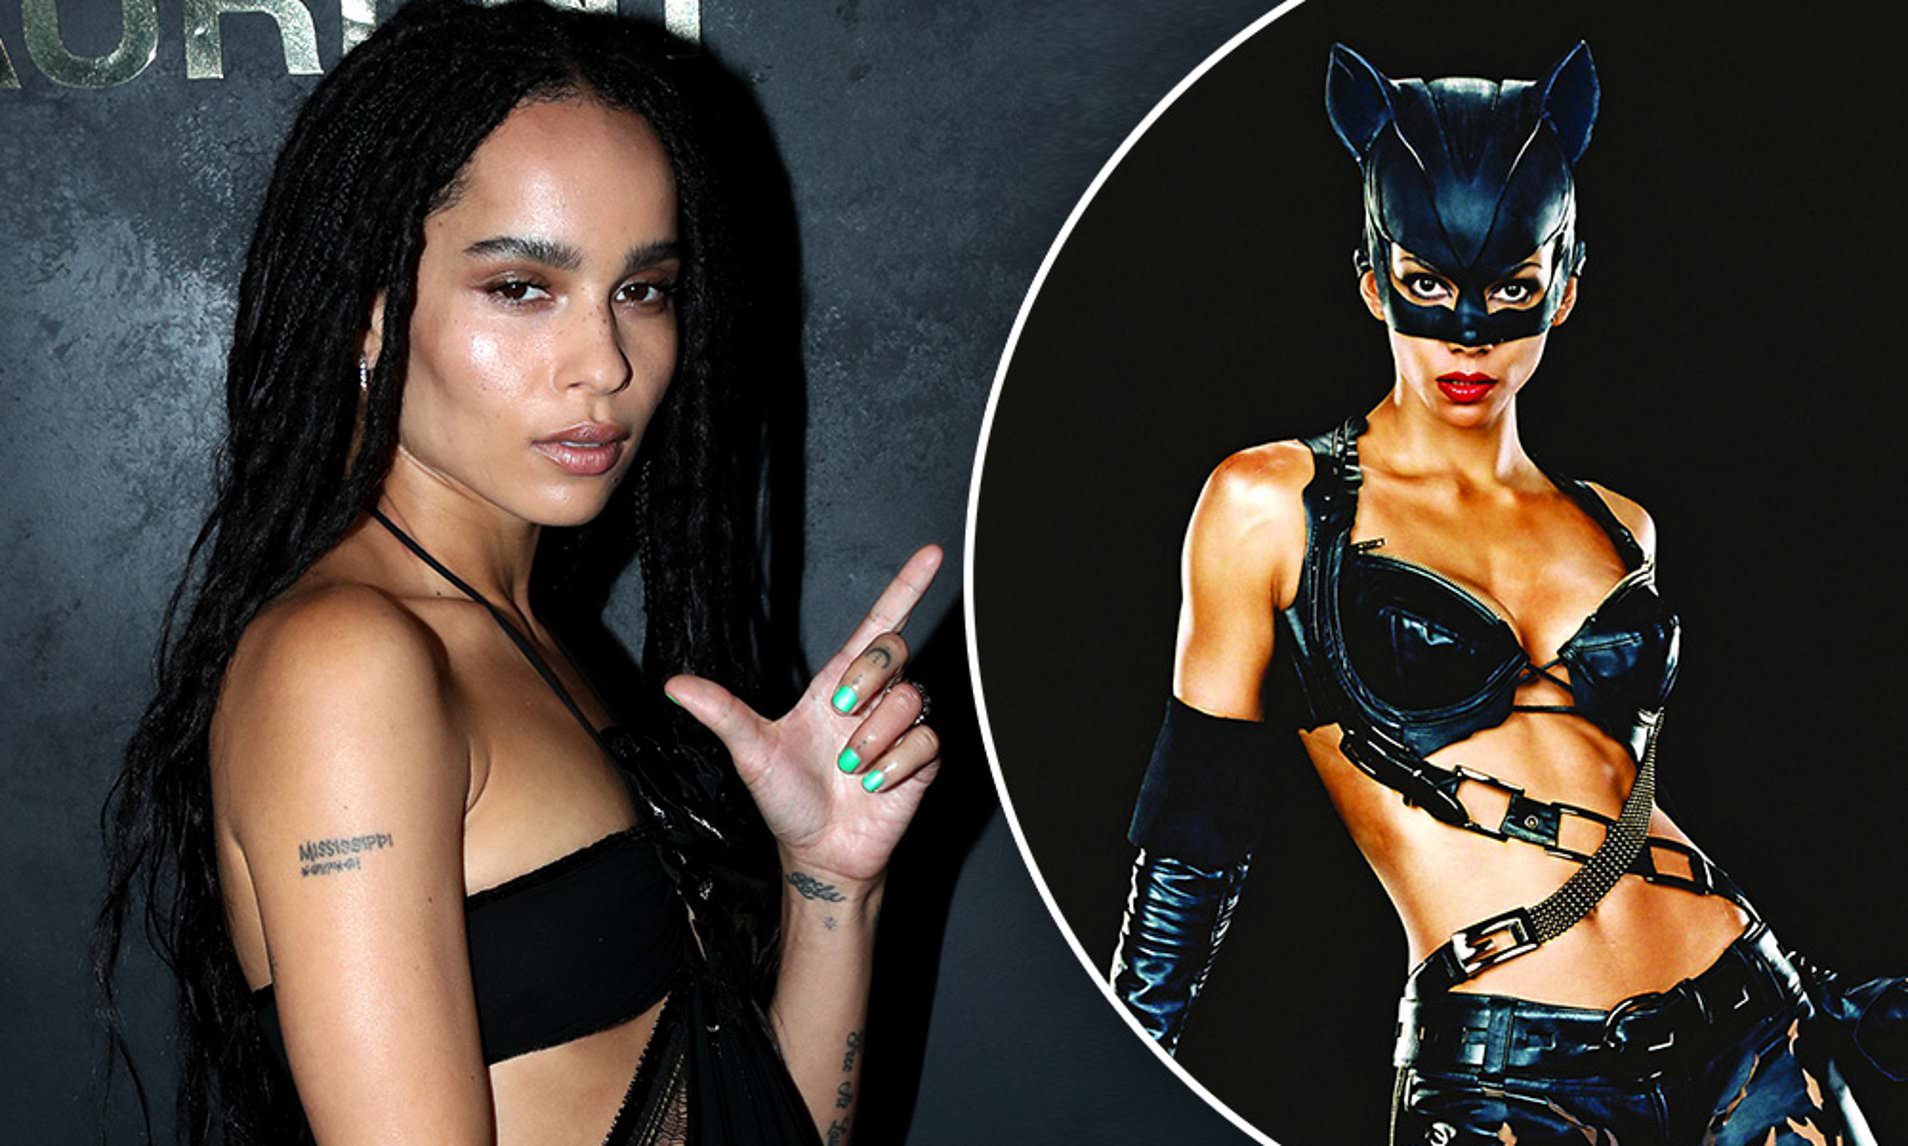 Zoe Kravitz Finalised For The Role Of Catwoman In The Upcoming Batman Movie